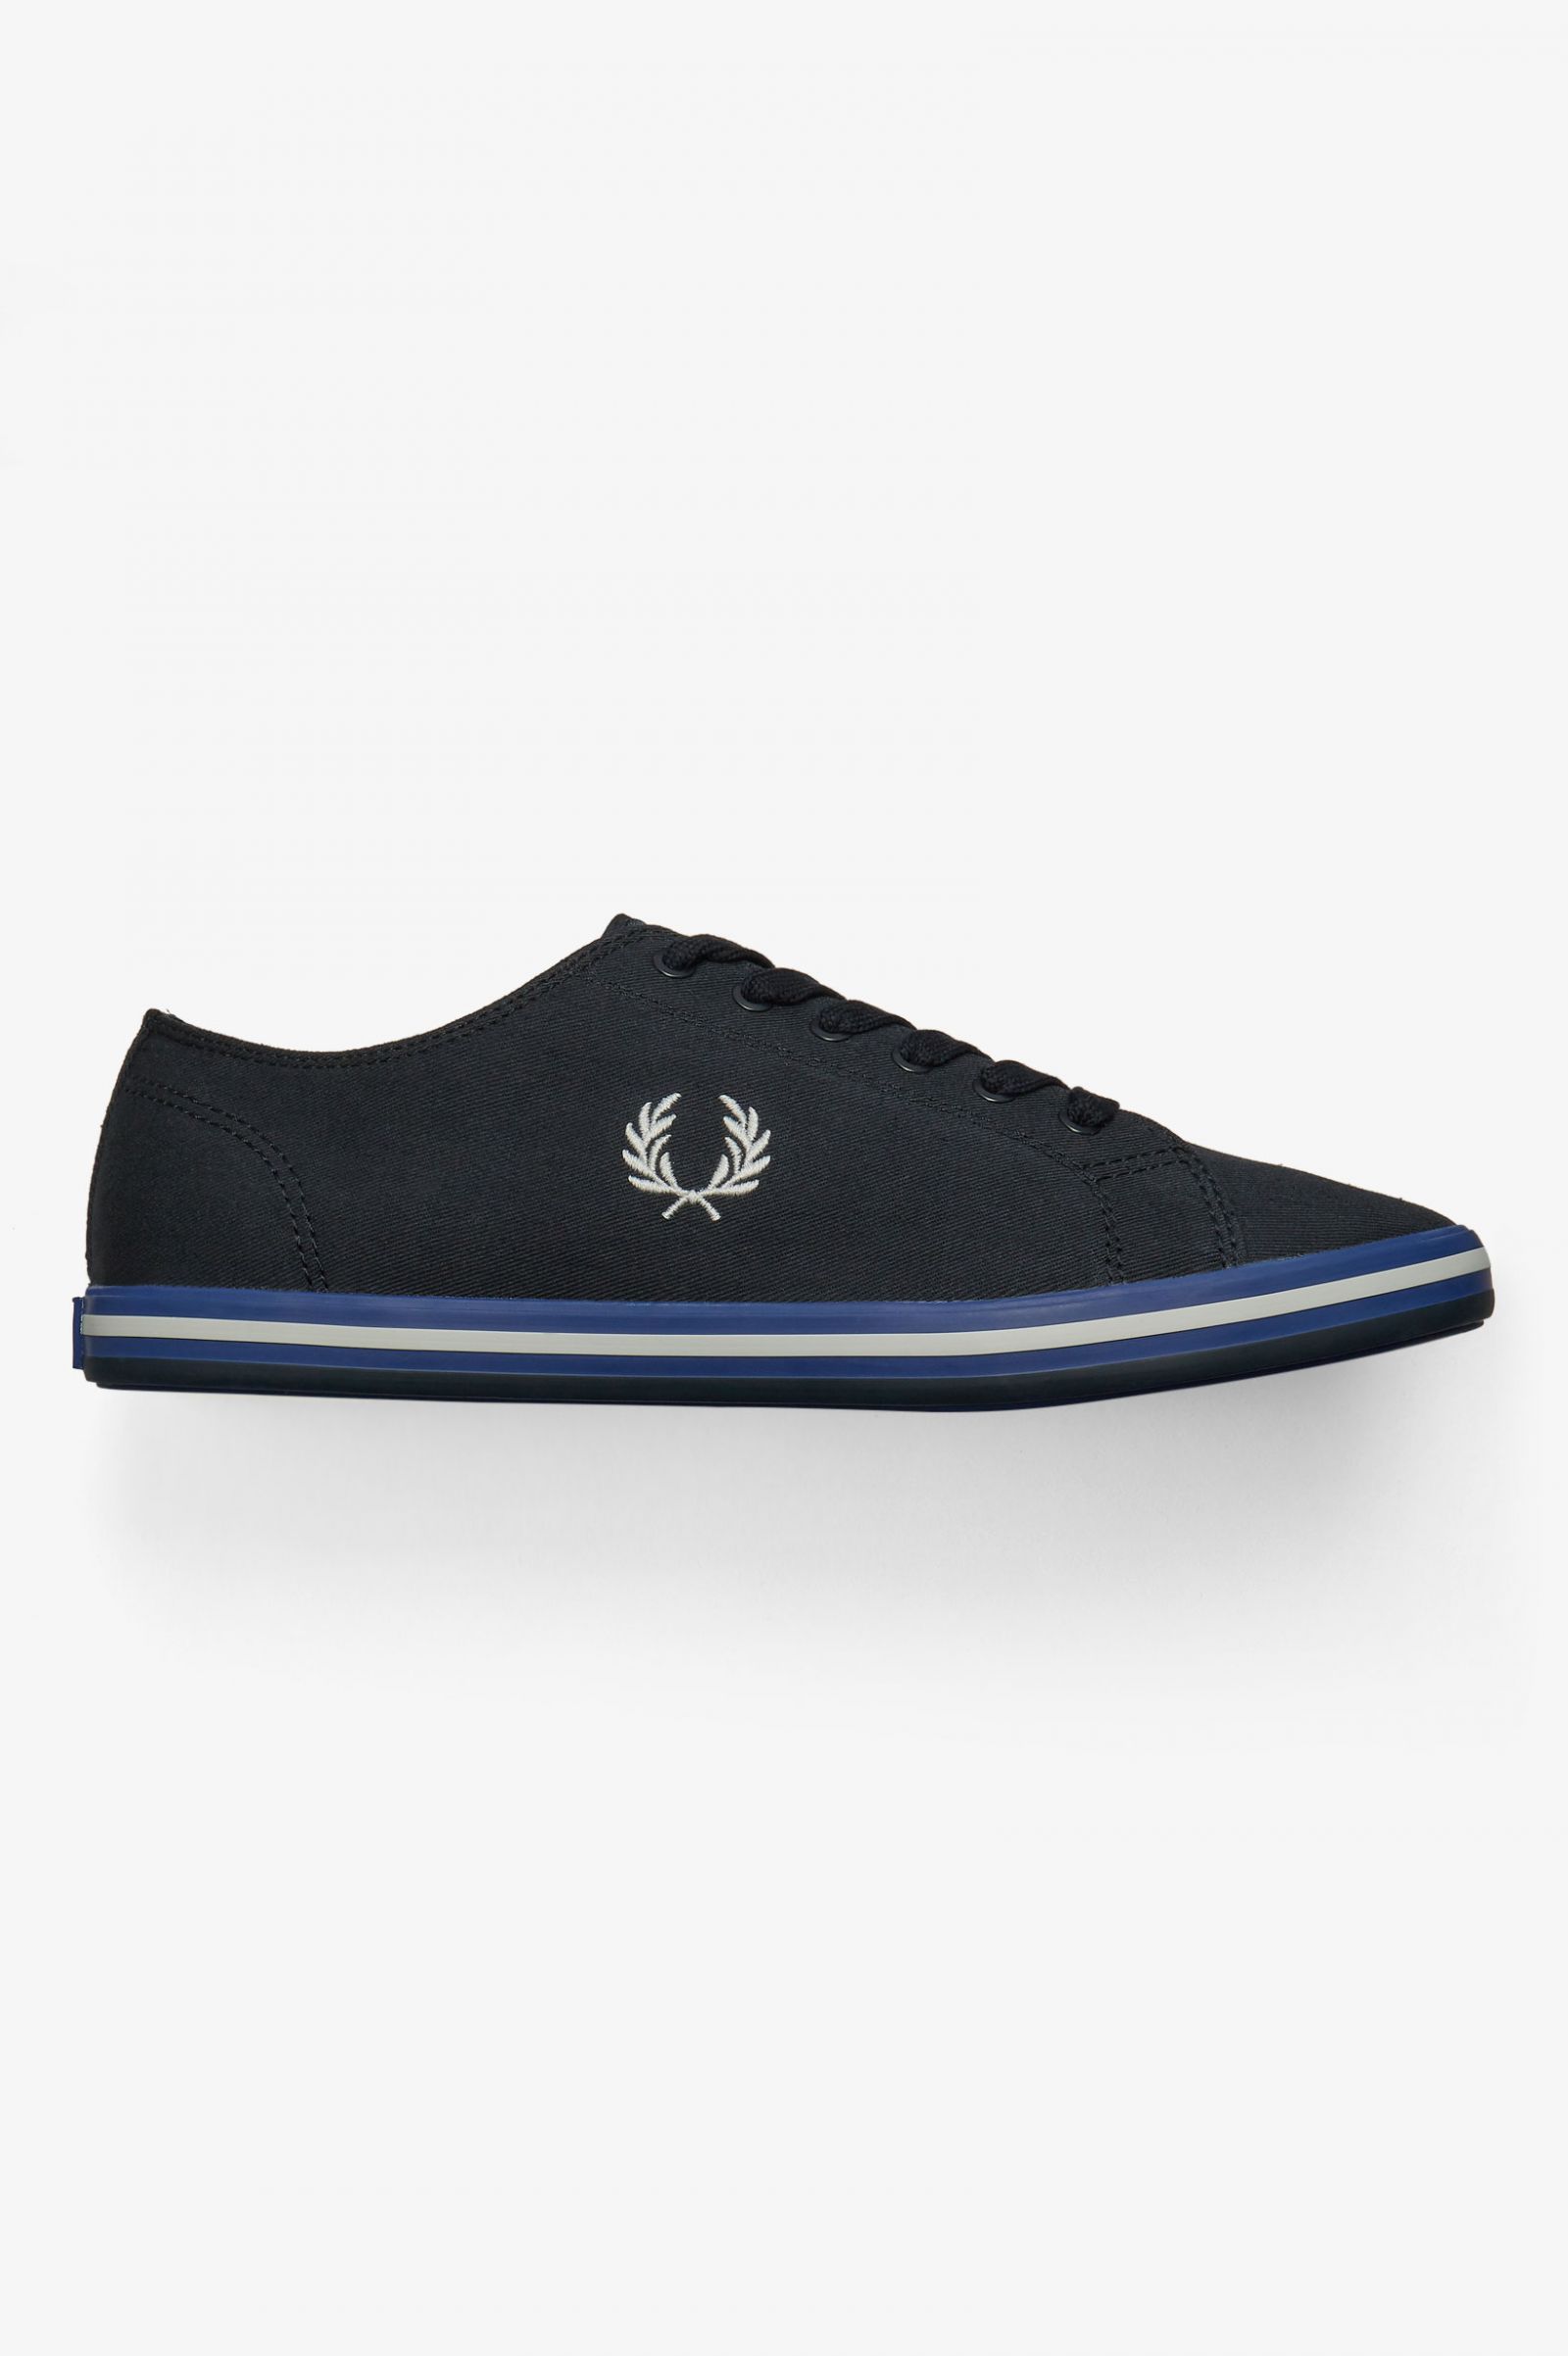 fred perry kingston twill black